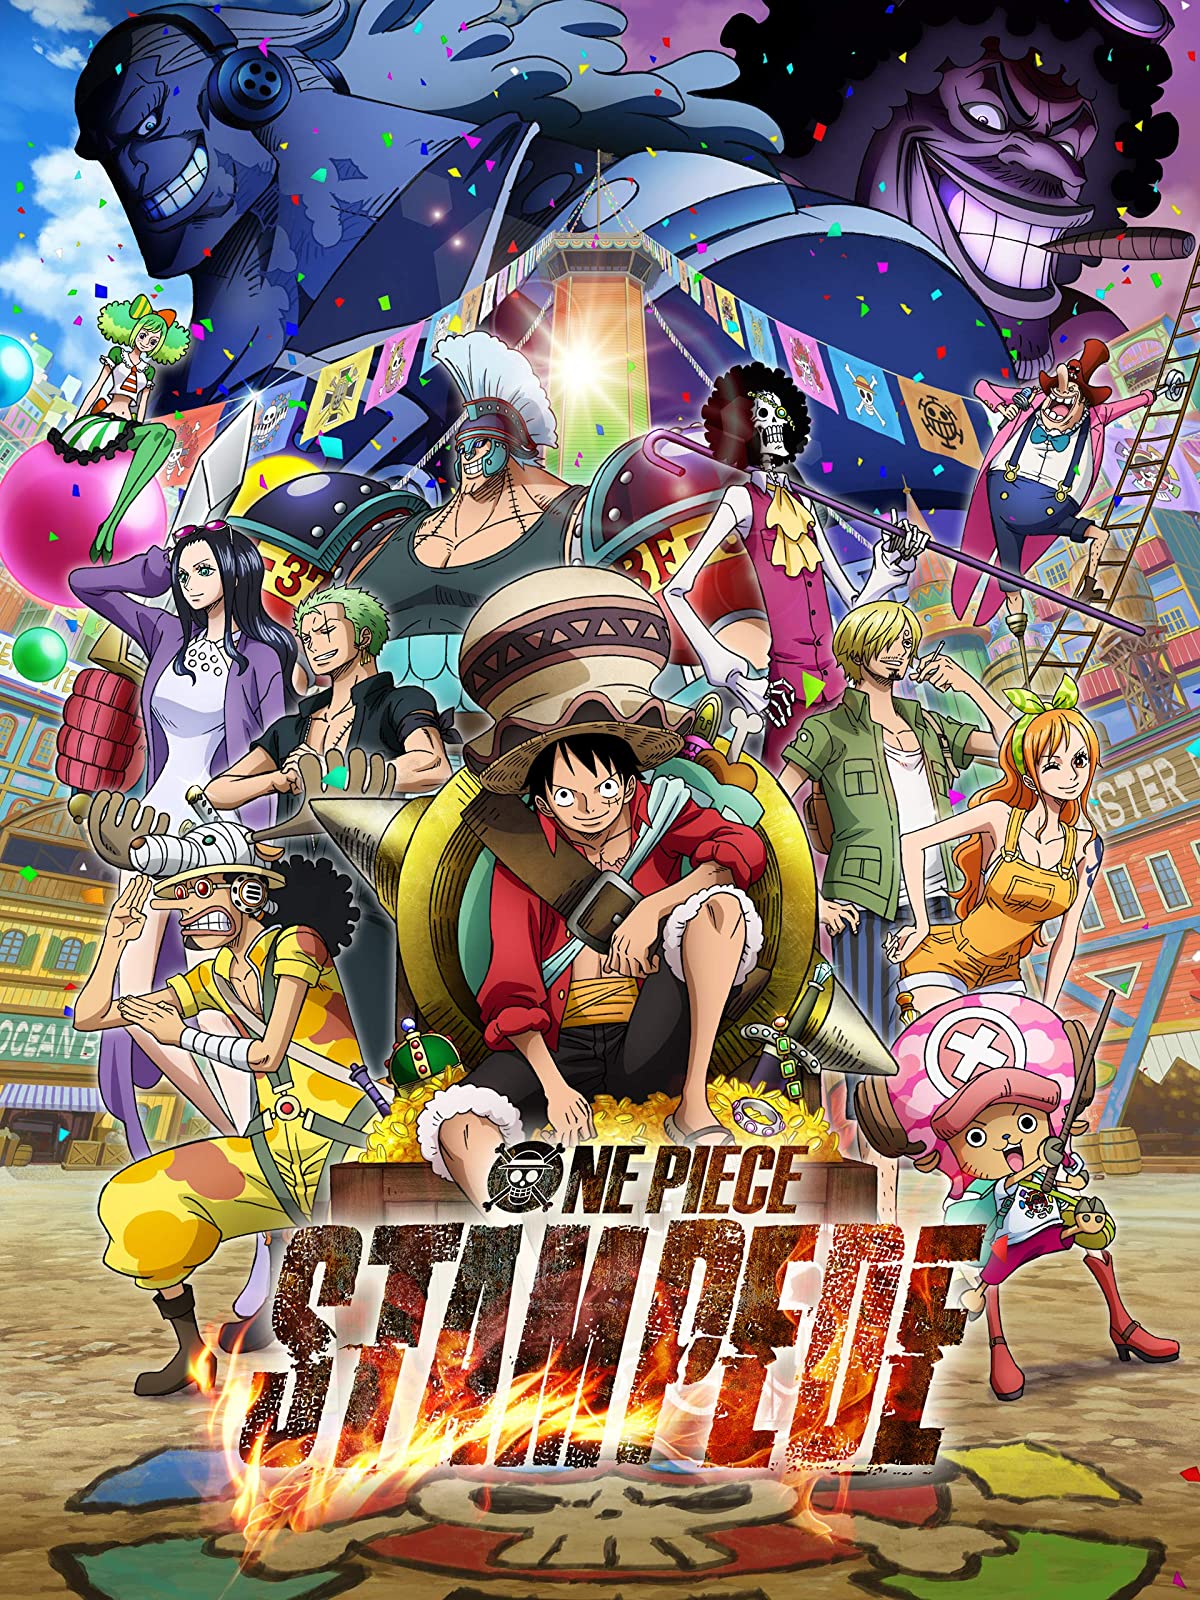 Douglas bullet from the movie one piece stampede with plane background